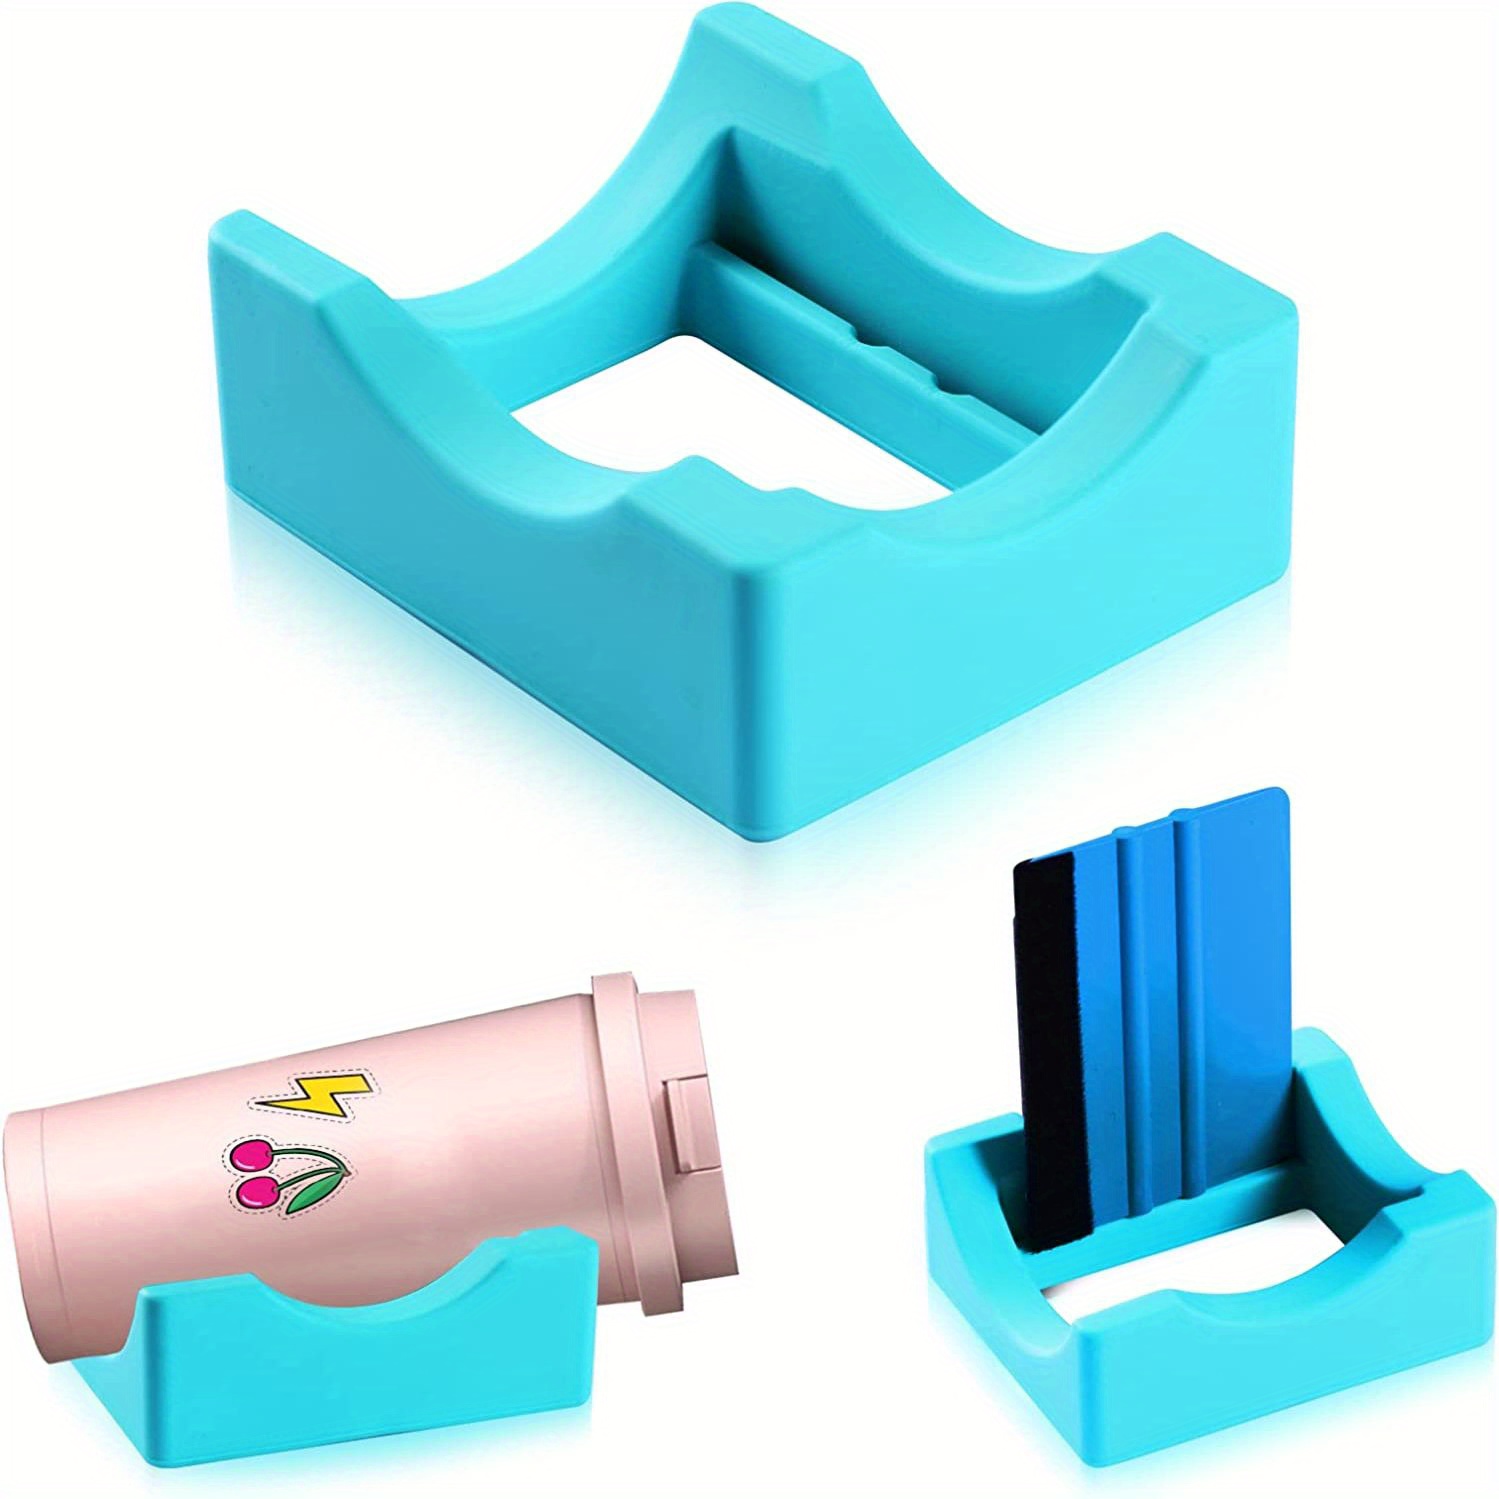  ibasenice 3pcs Silicone Cup Holder DIY Tumbler Cradle